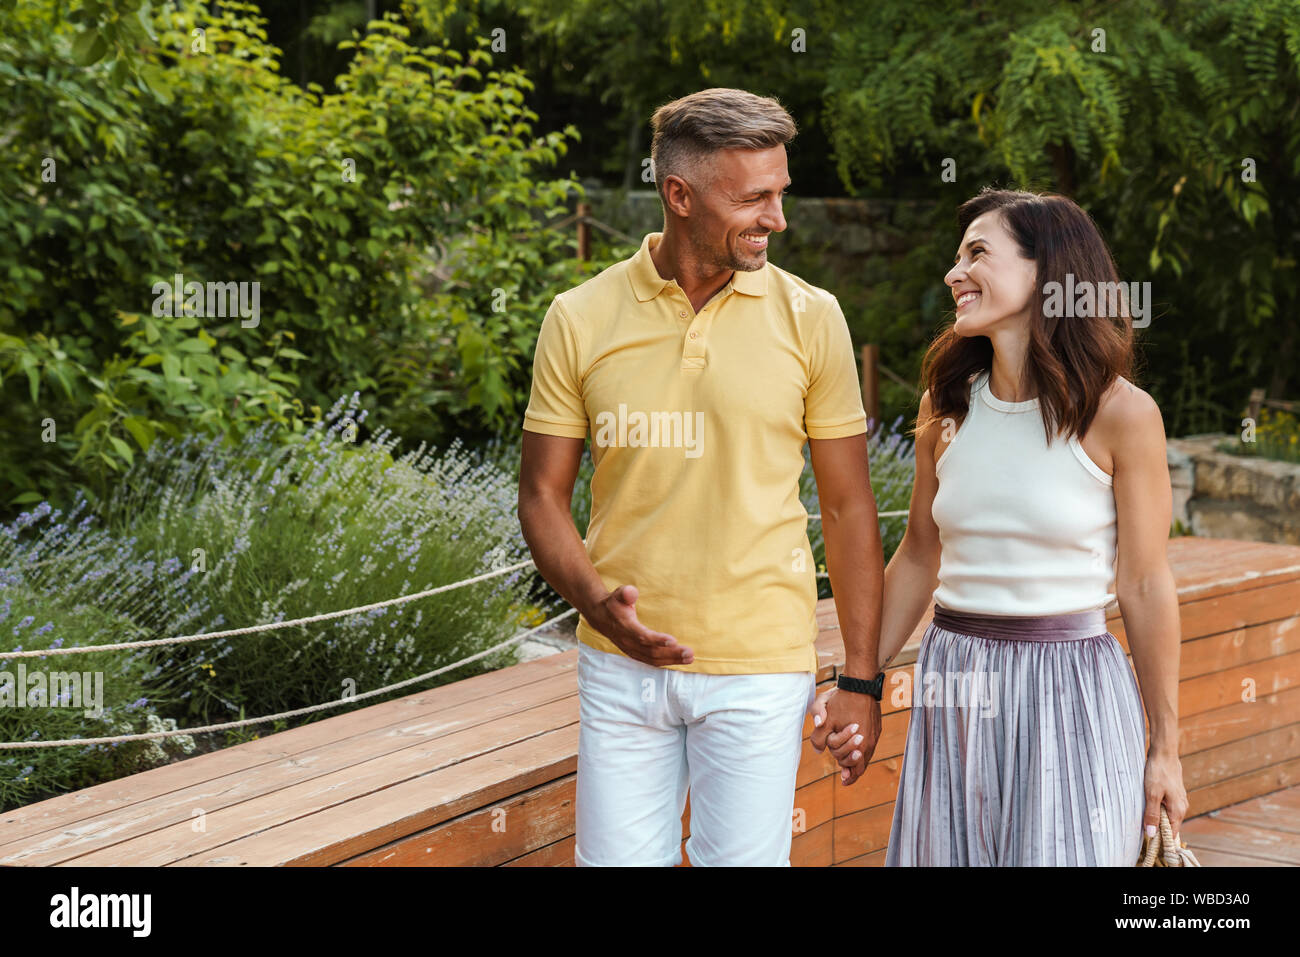 Portrait of smiling middle-aged couple man and woman holding hands together while walking in summer park Stock Photo